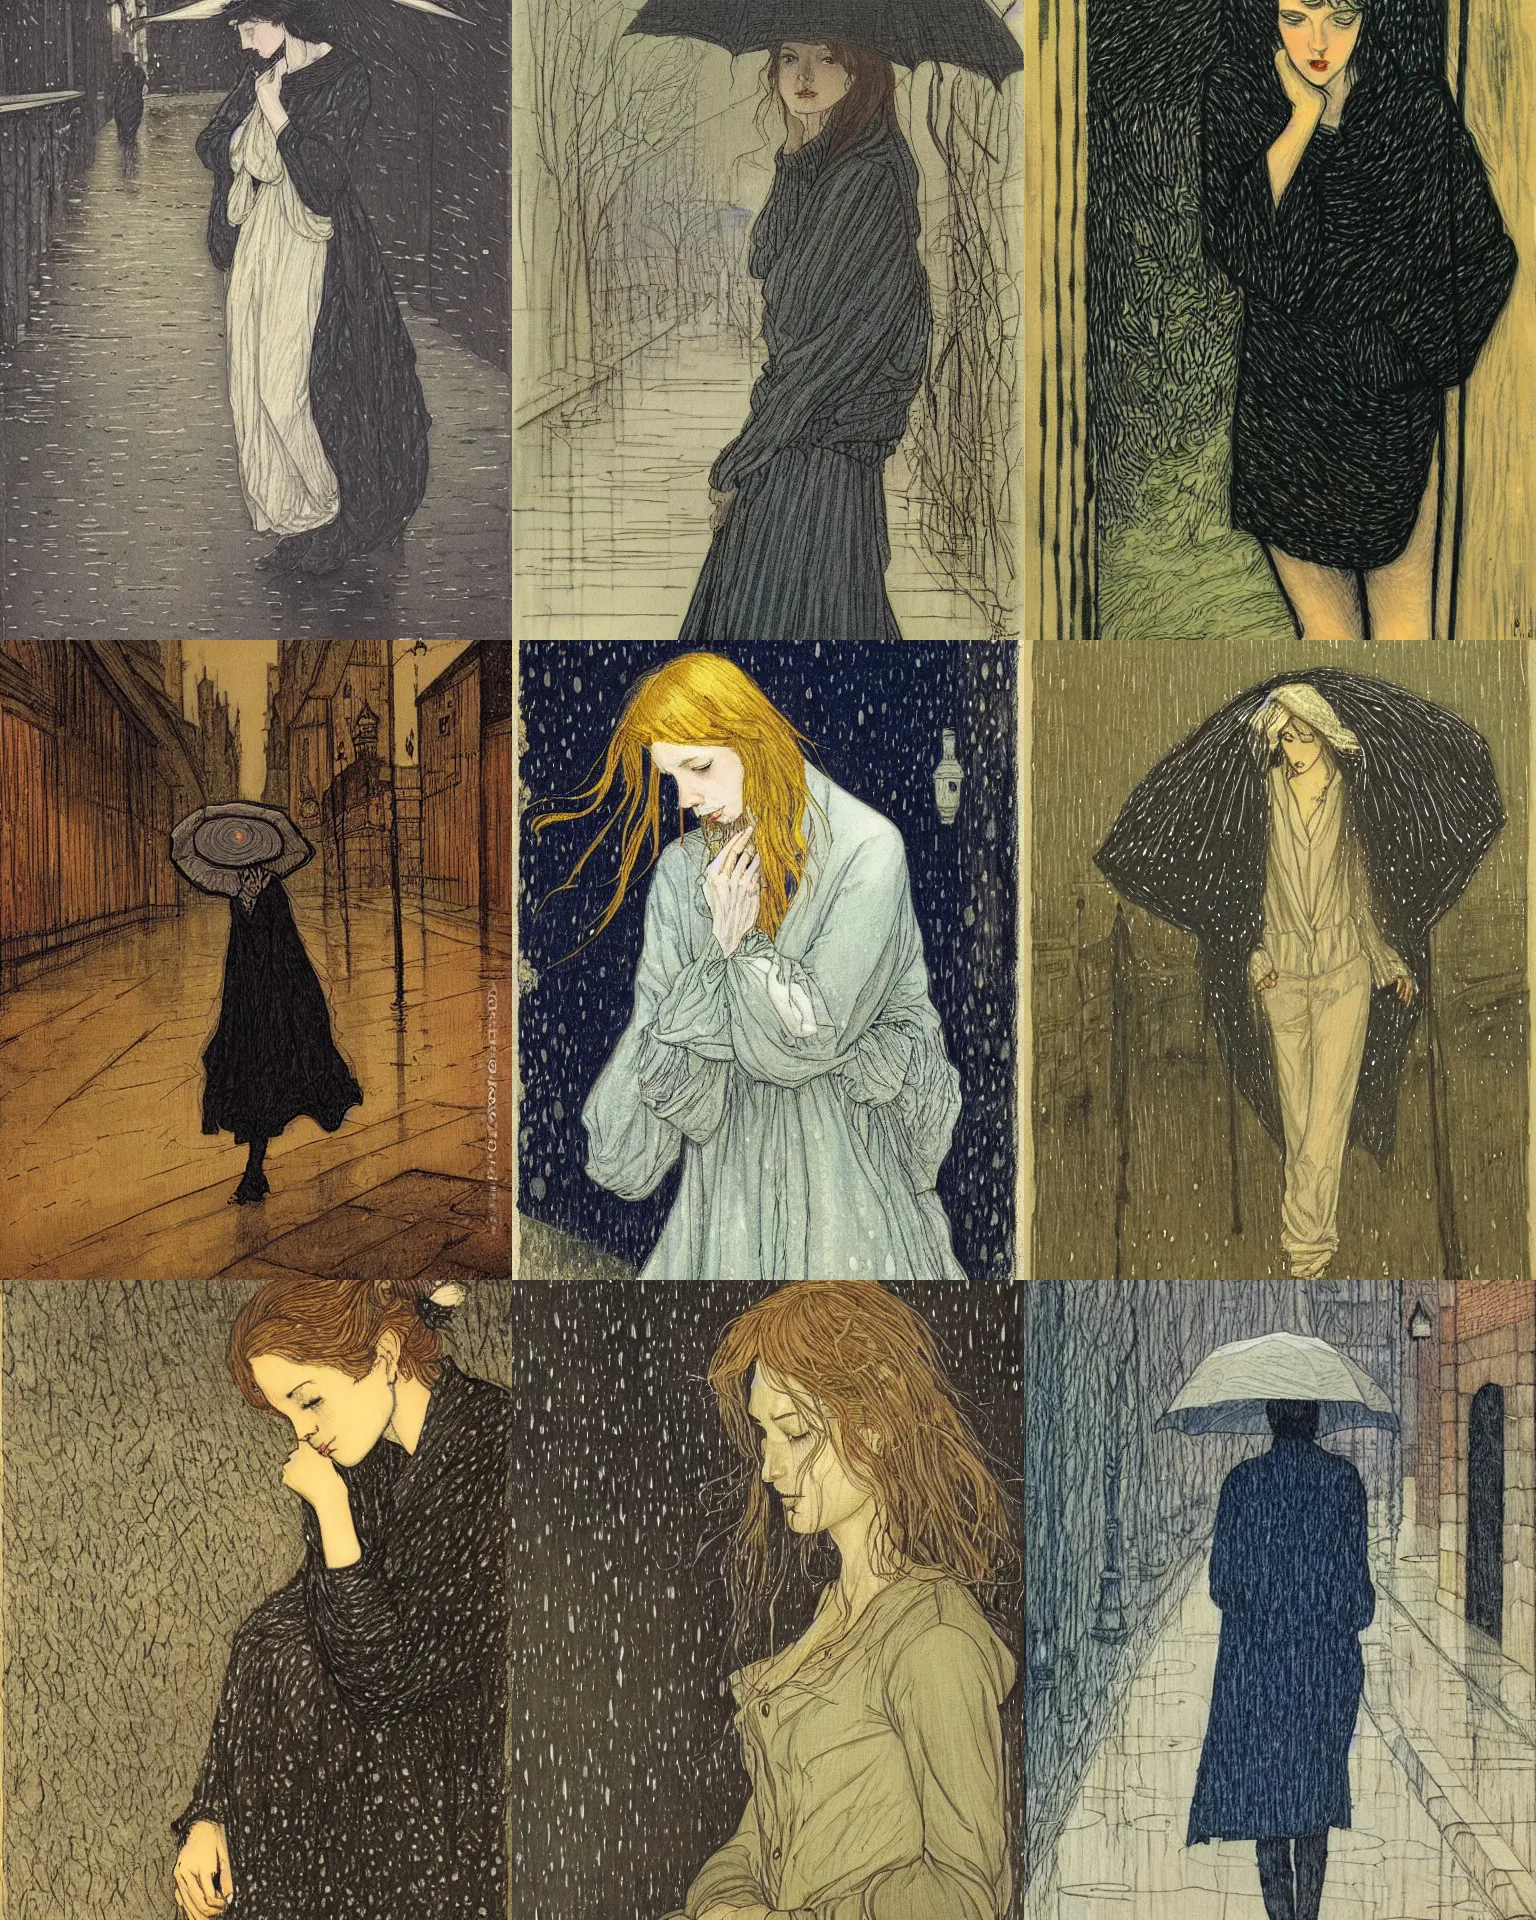 Prompt: portrait of a sad person by rebecca guay, rain, street at night, melancholy